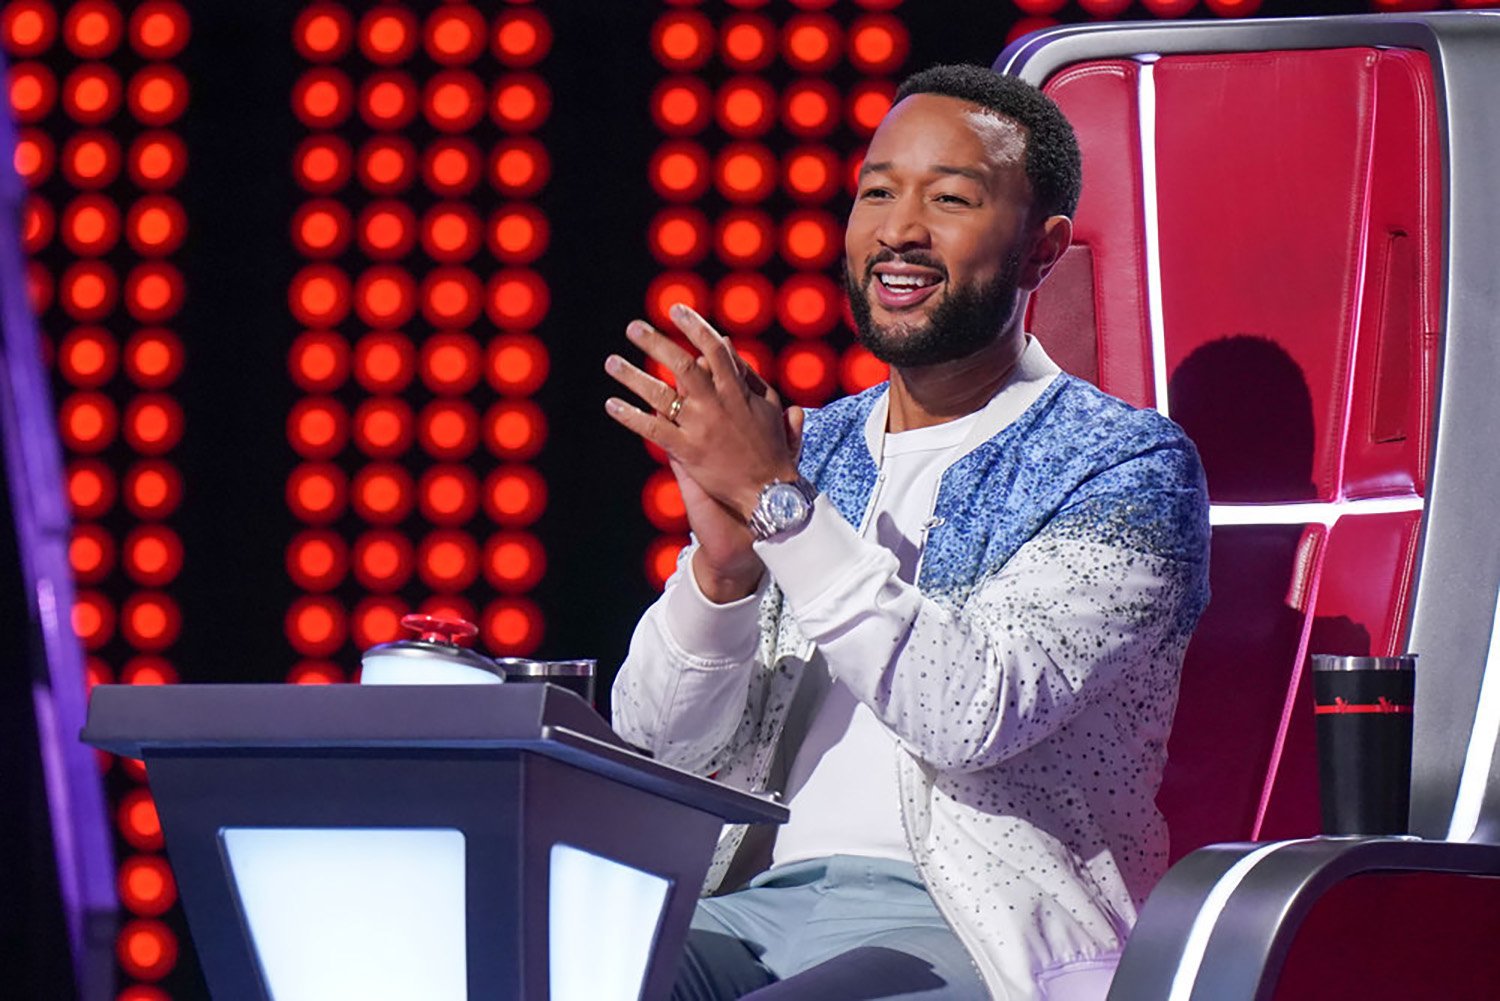 John Legend claps his hands and smiles in his seat on The Voice Season 22